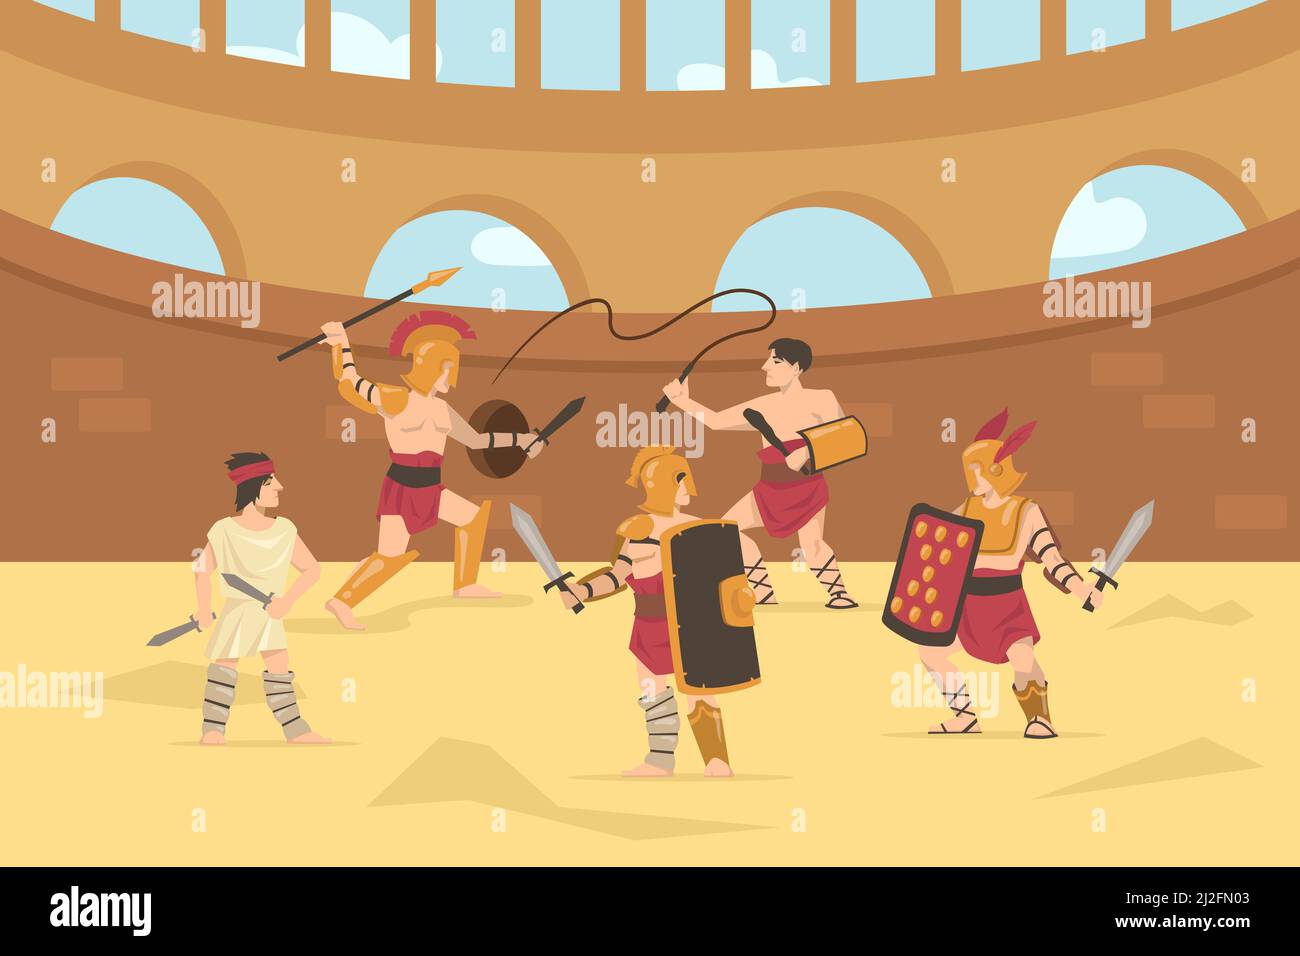 Roman armored soldiers fighting with swords, spears and whips. Cartoon vector illustration. Gladiator fight in Colosseum battlefield of ancient Rome, Stock Vector